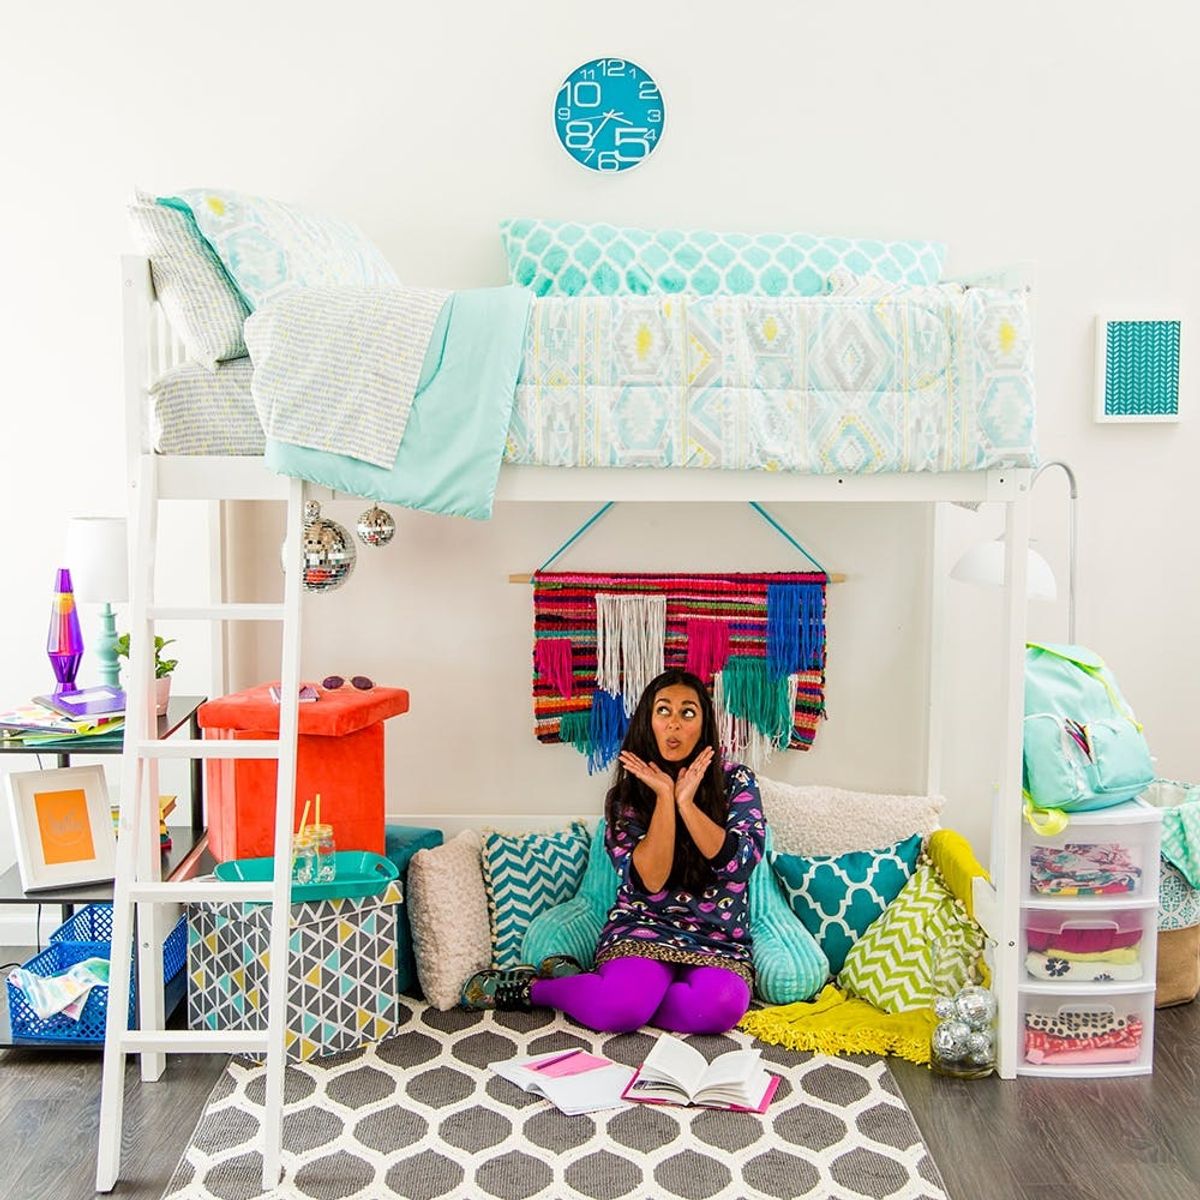 How Our Creative Director Would Deck Out Her Dorm Room If She Could Do It All Over Again